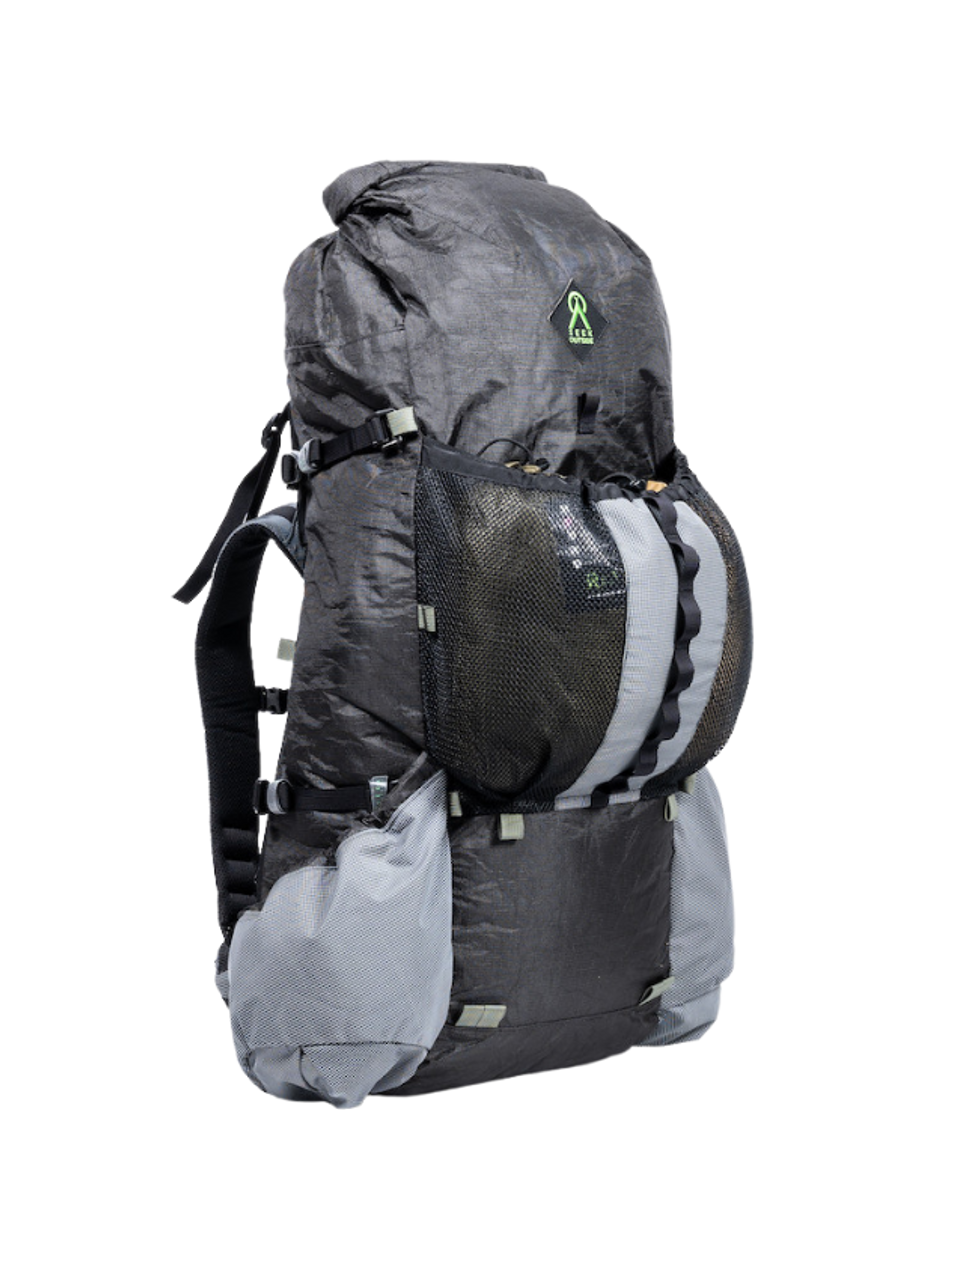 4 Simple Ways To Choose A Durable & Functional Outdoor Backpack